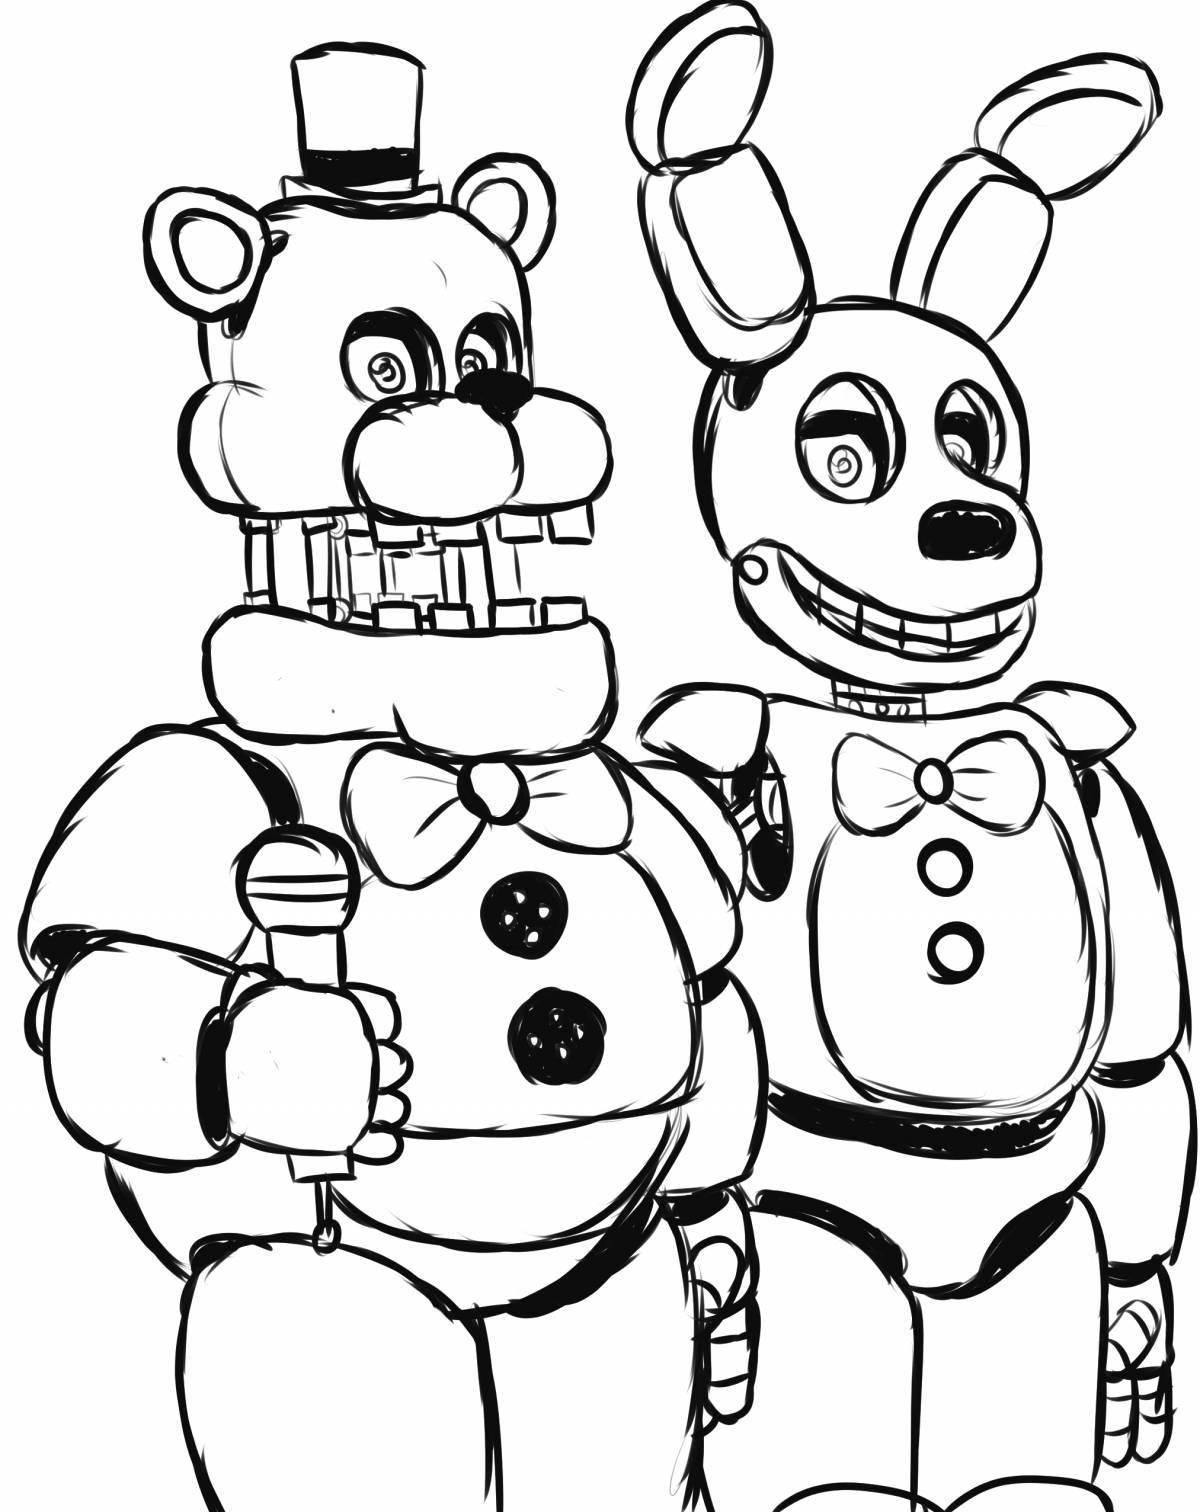 Coloring page adorable robot freddy